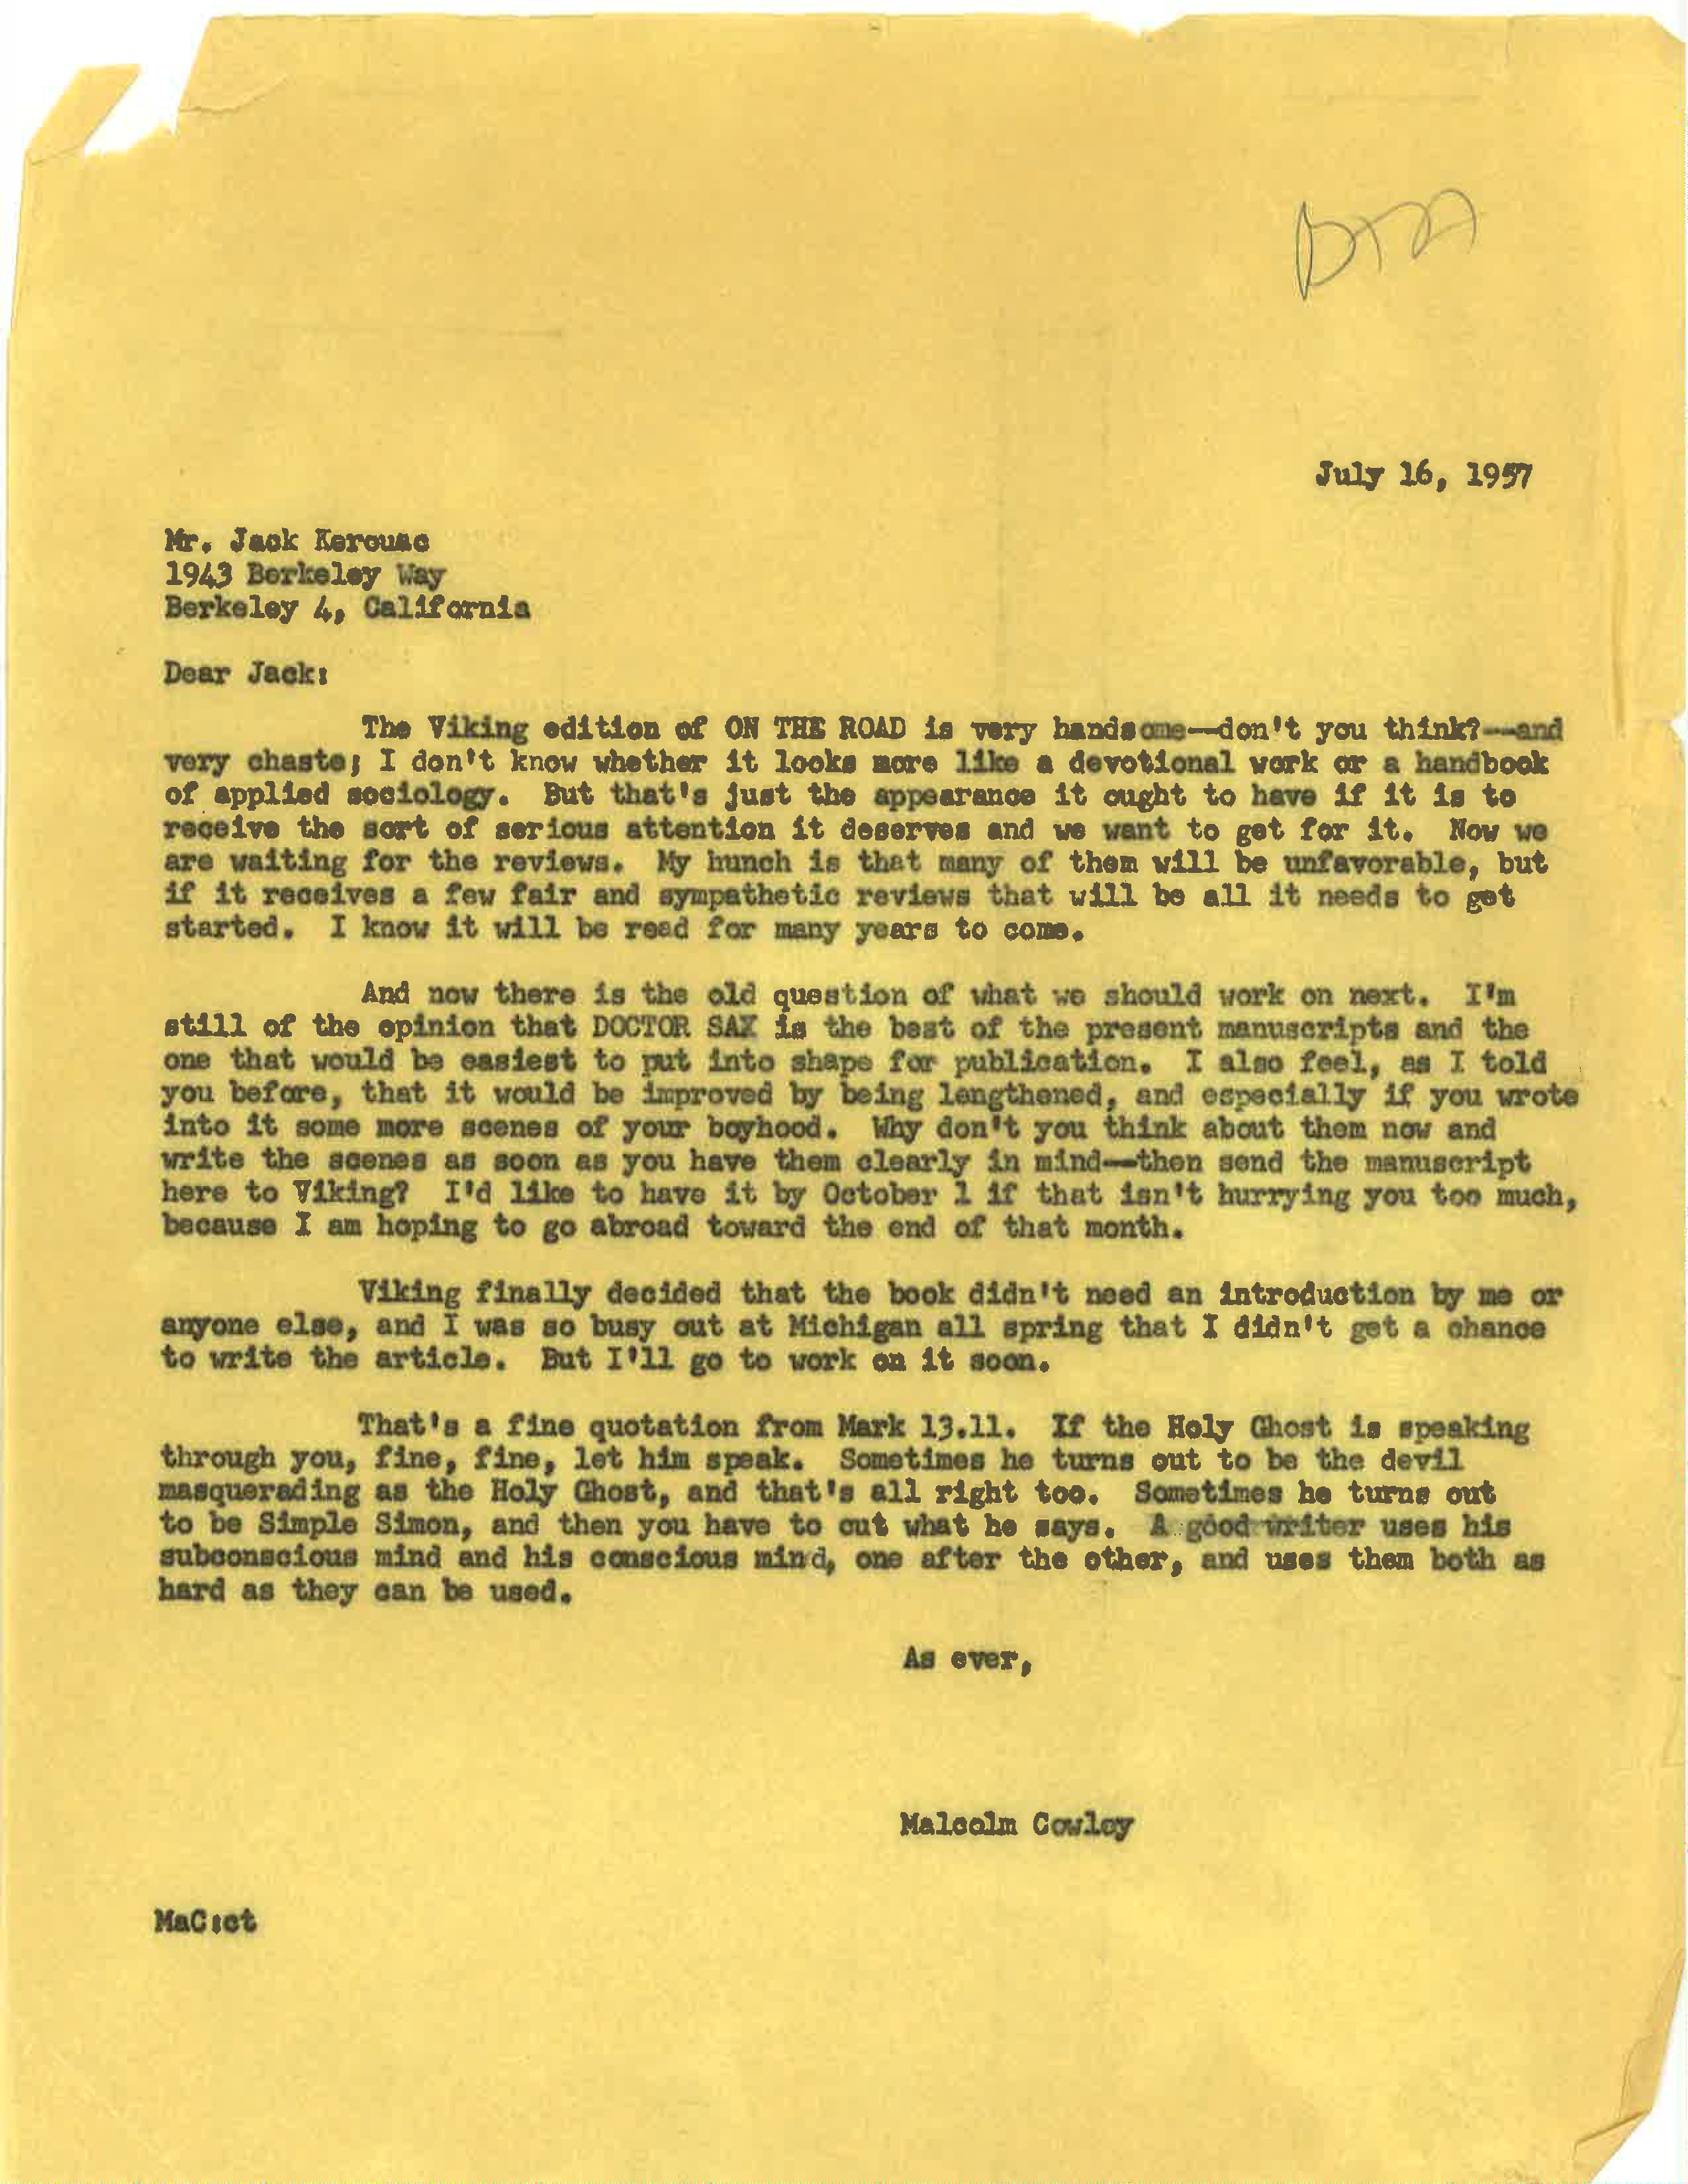 letter Cowley wrote to Kerouac in July of 1957 on the eve of publication